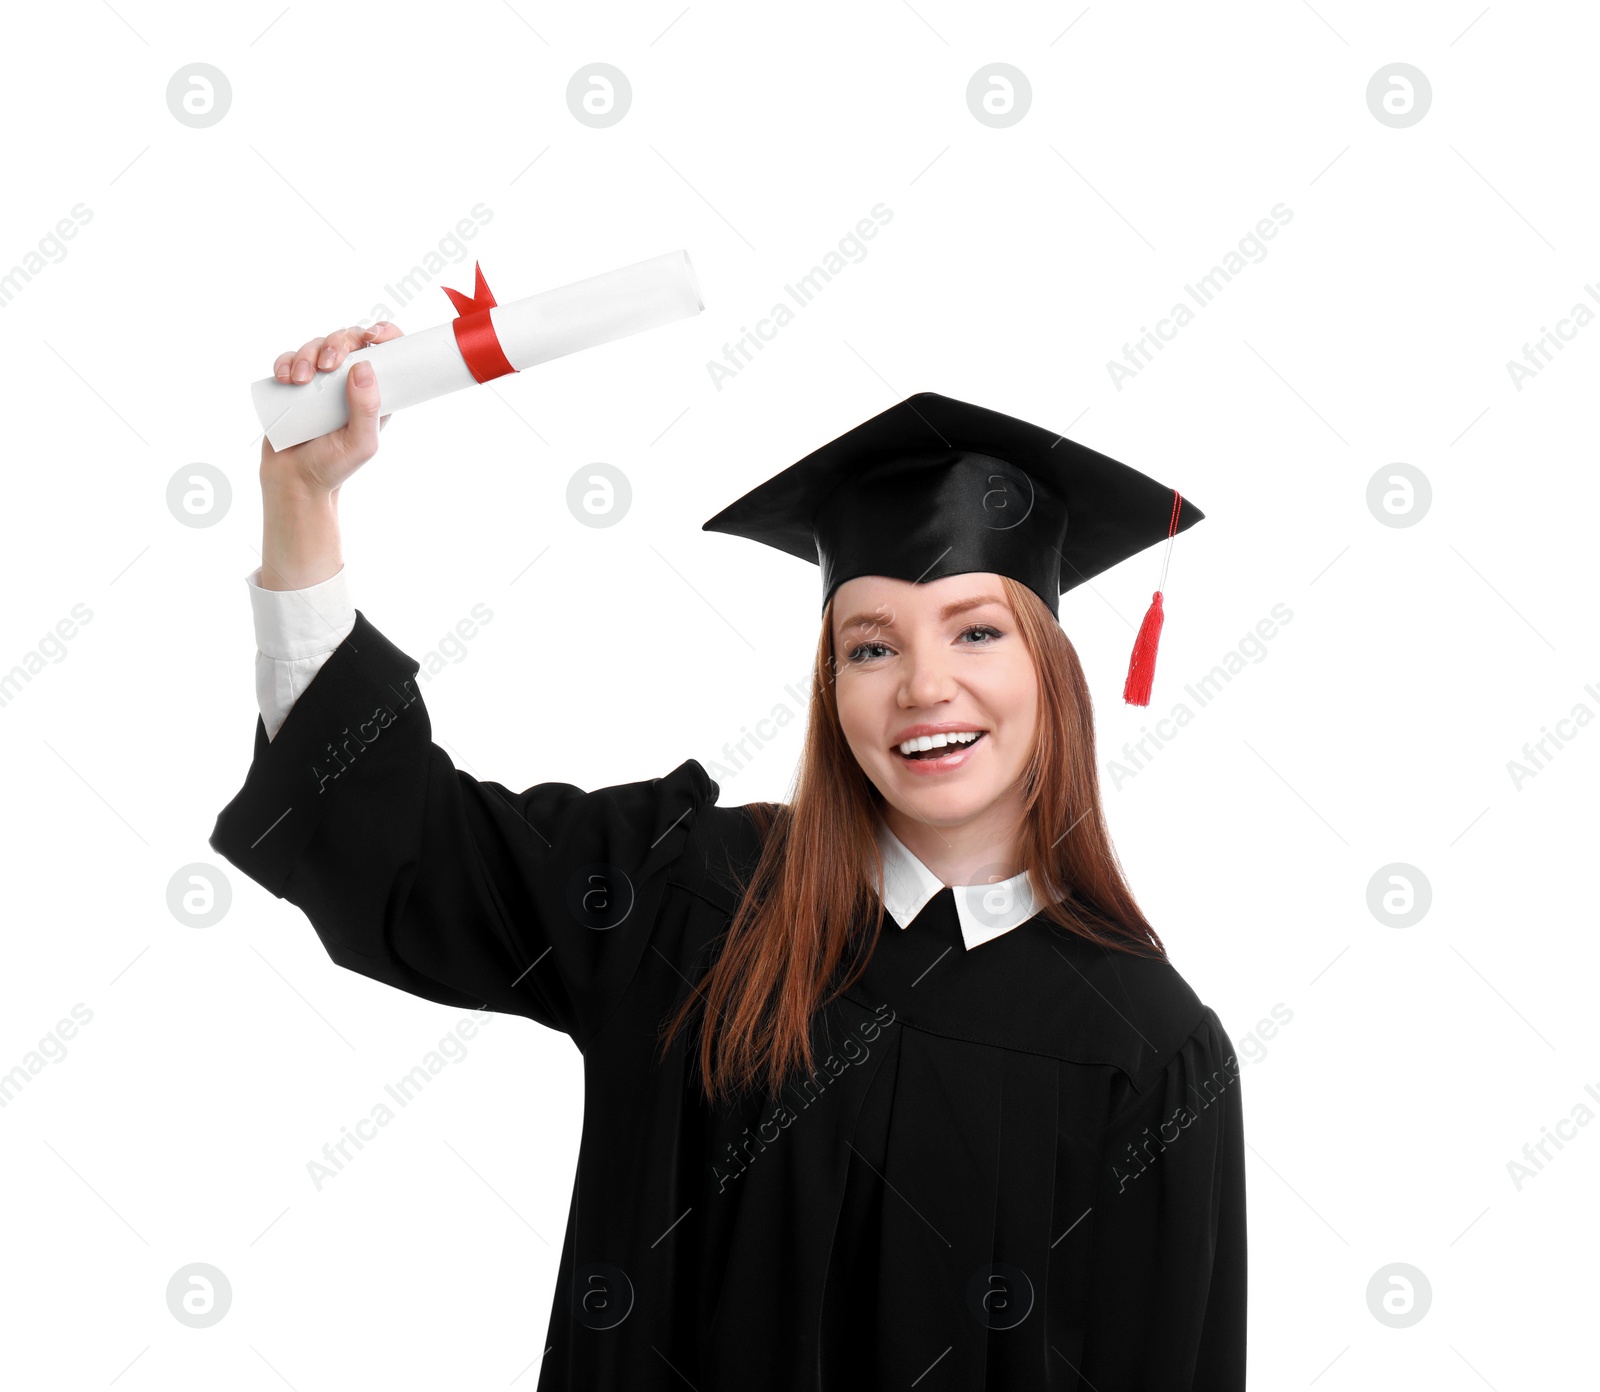 Photo of Happy student with graduation hat and diploma on white background